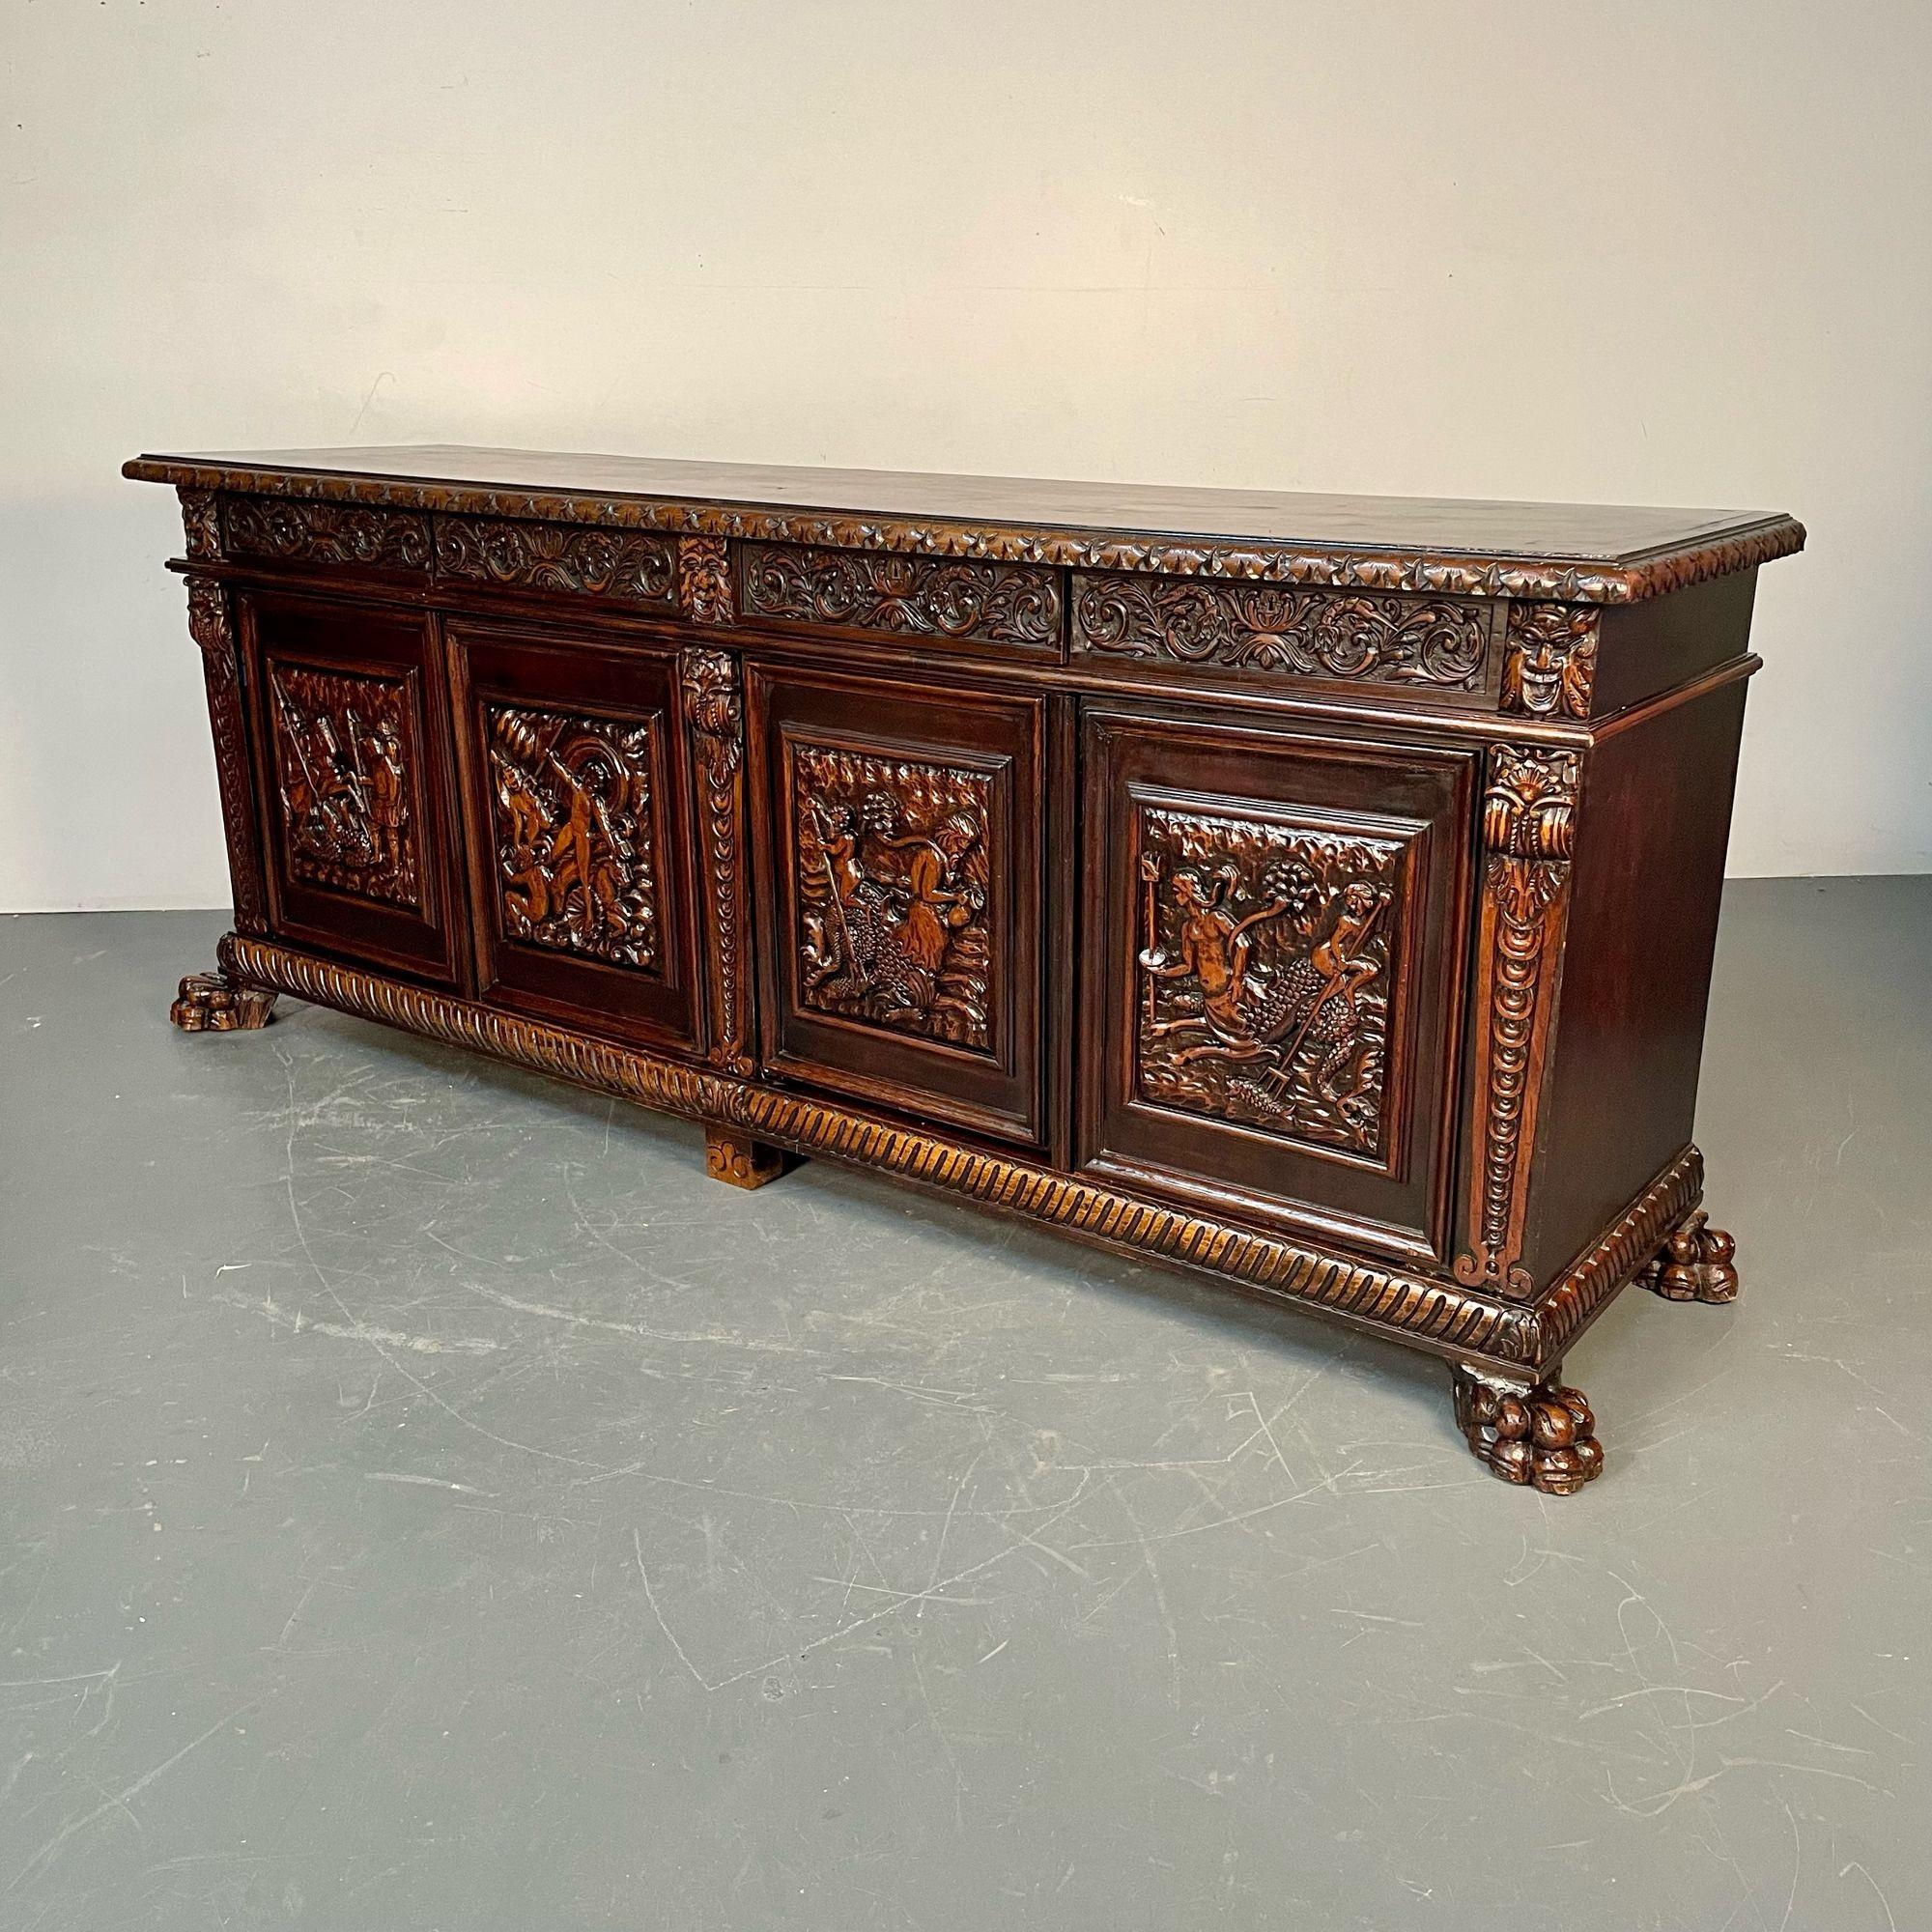 Romanian Monumental Renaissance Revival Sideboard, Heavily Carved, Mahogany, Branded For Sale